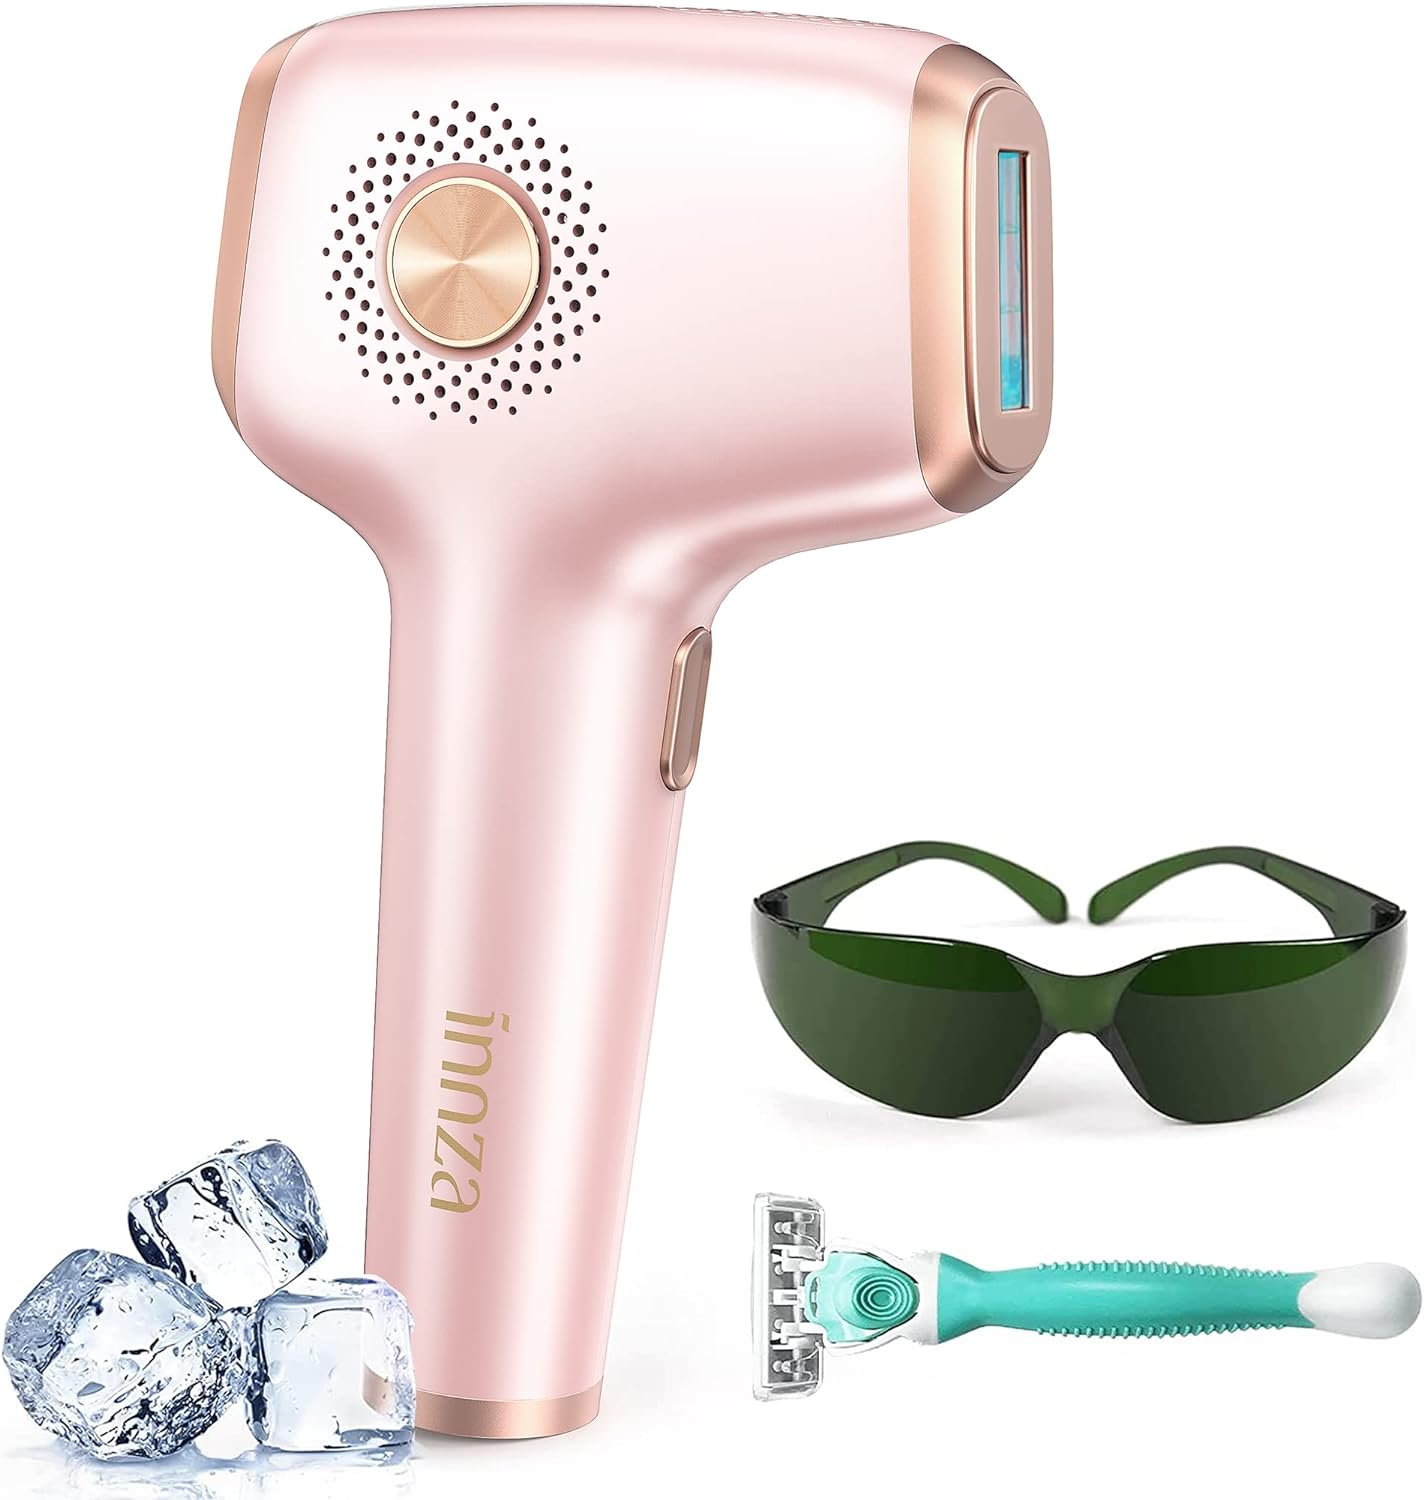 INNZA Laser Hair Removal Review